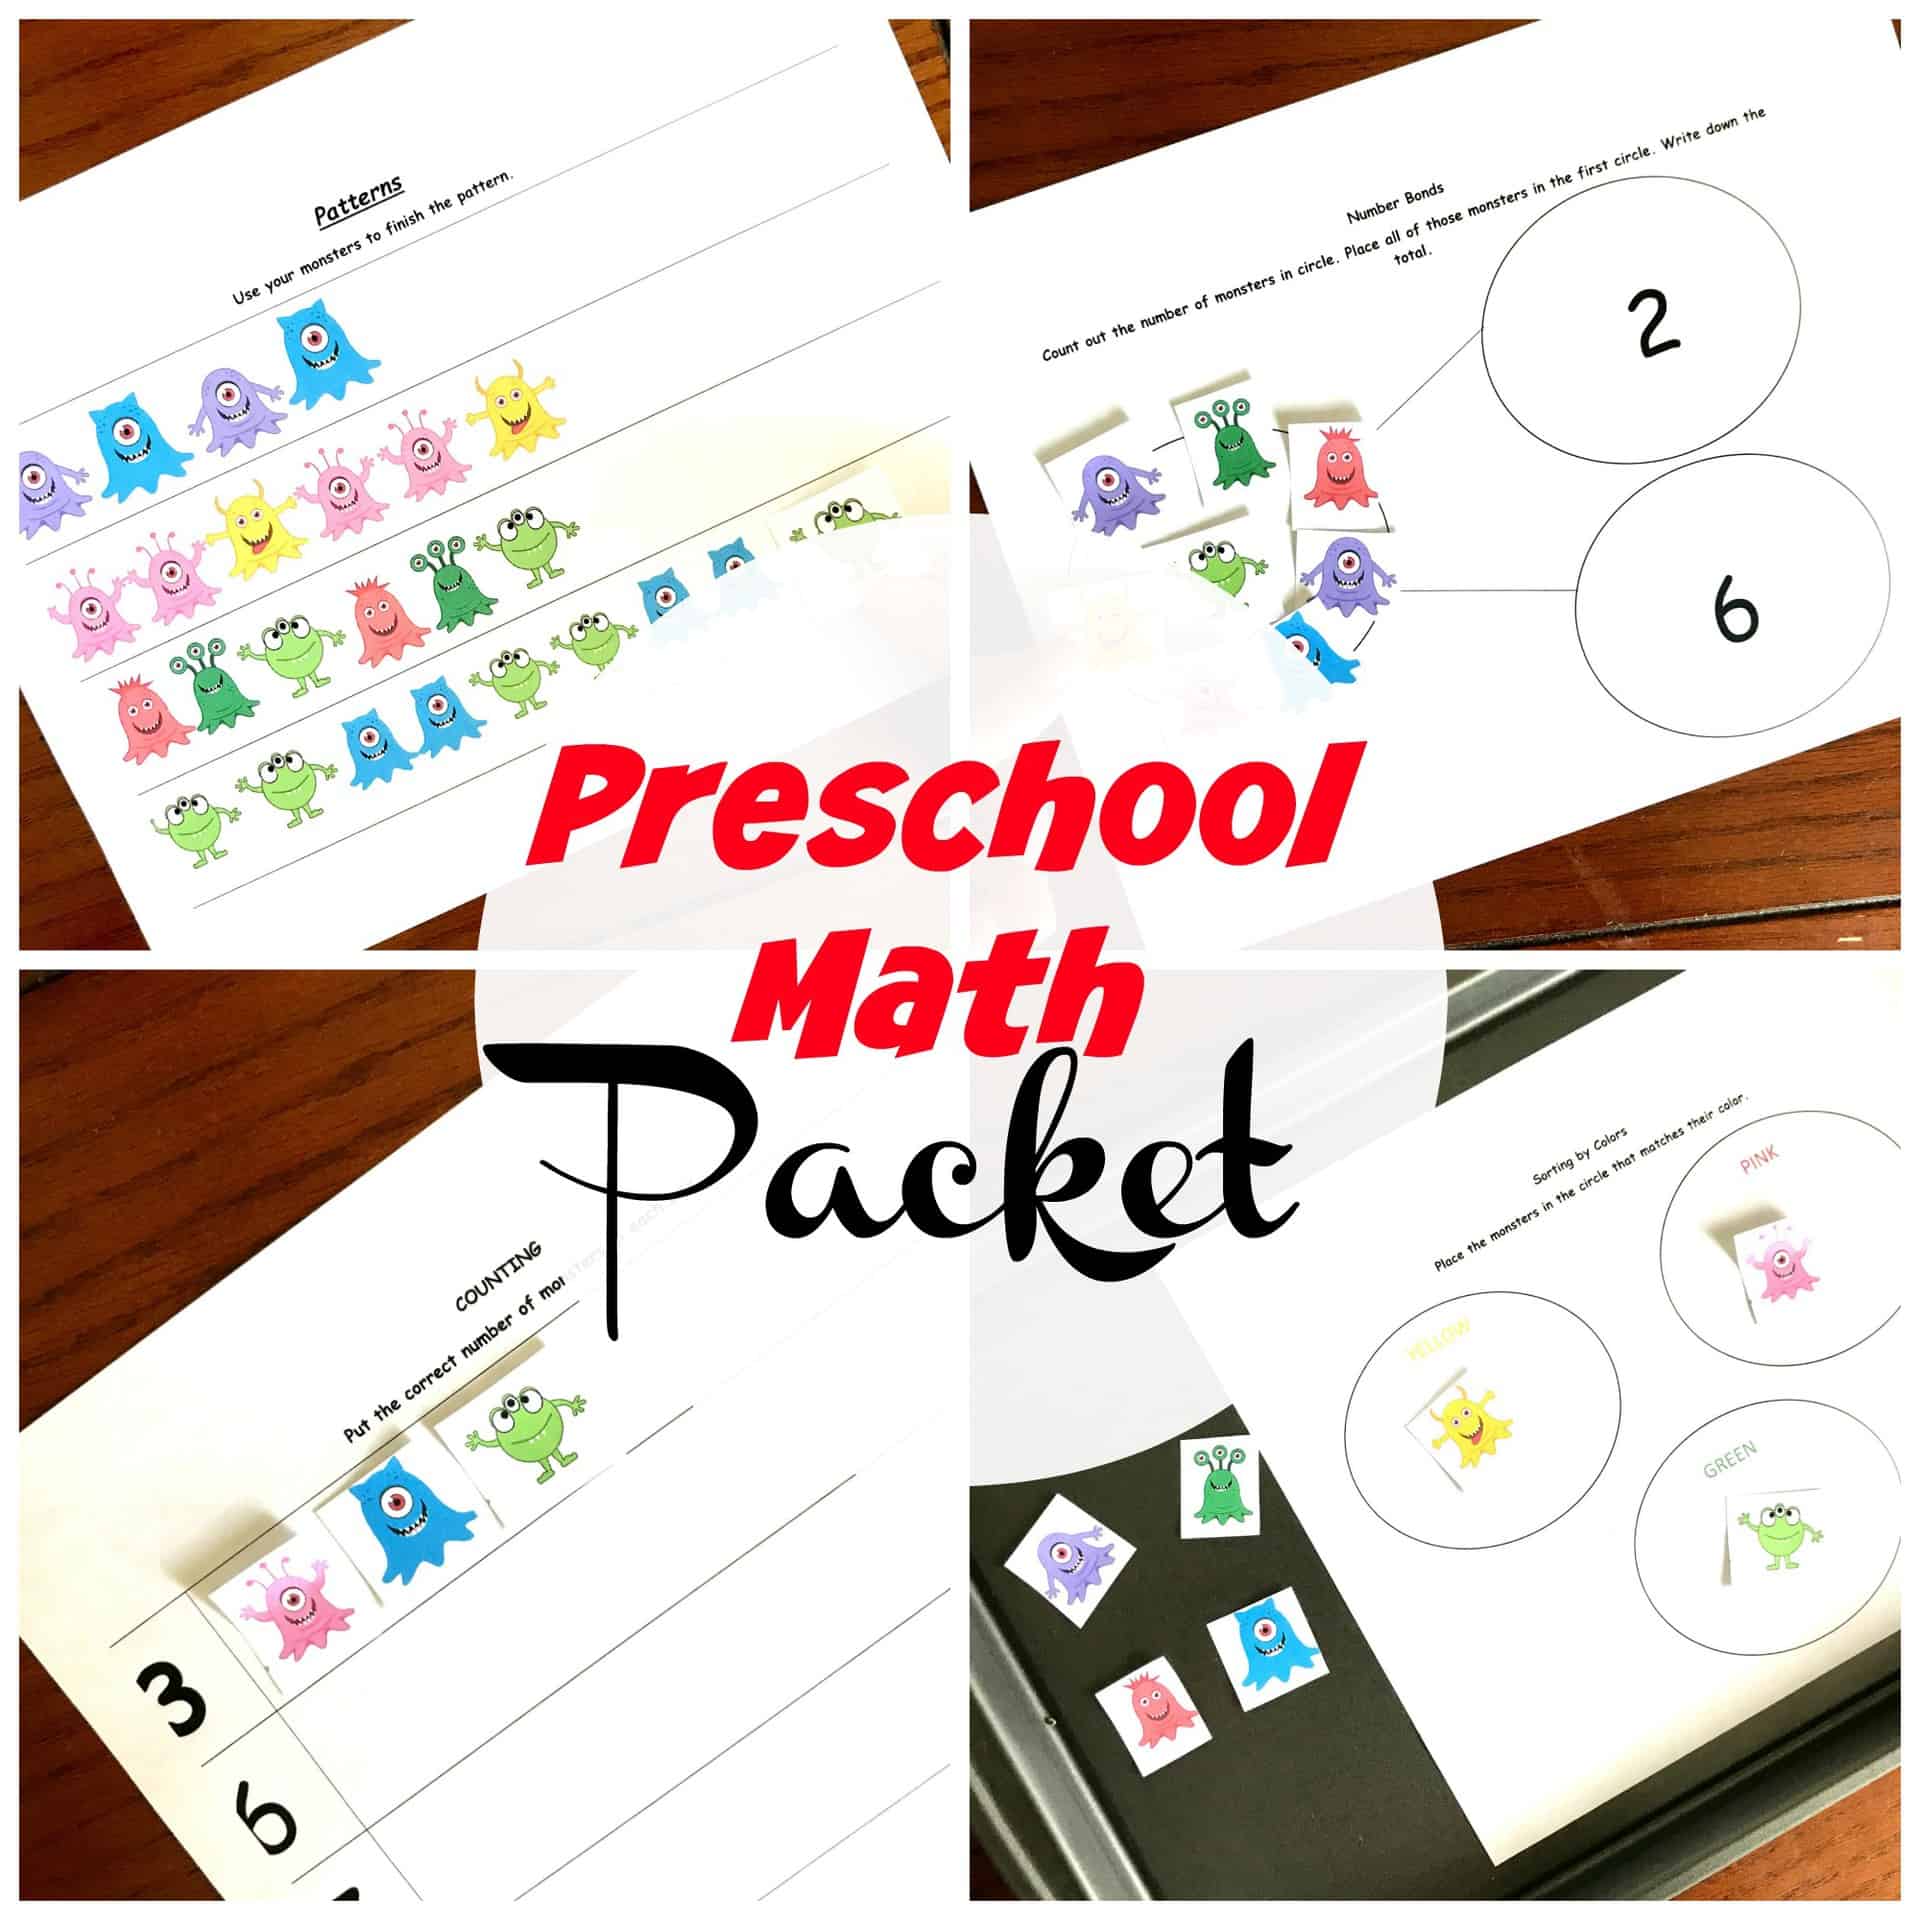 5 Preschool Math Worksheets To Practice Patterns, Sorting, and More